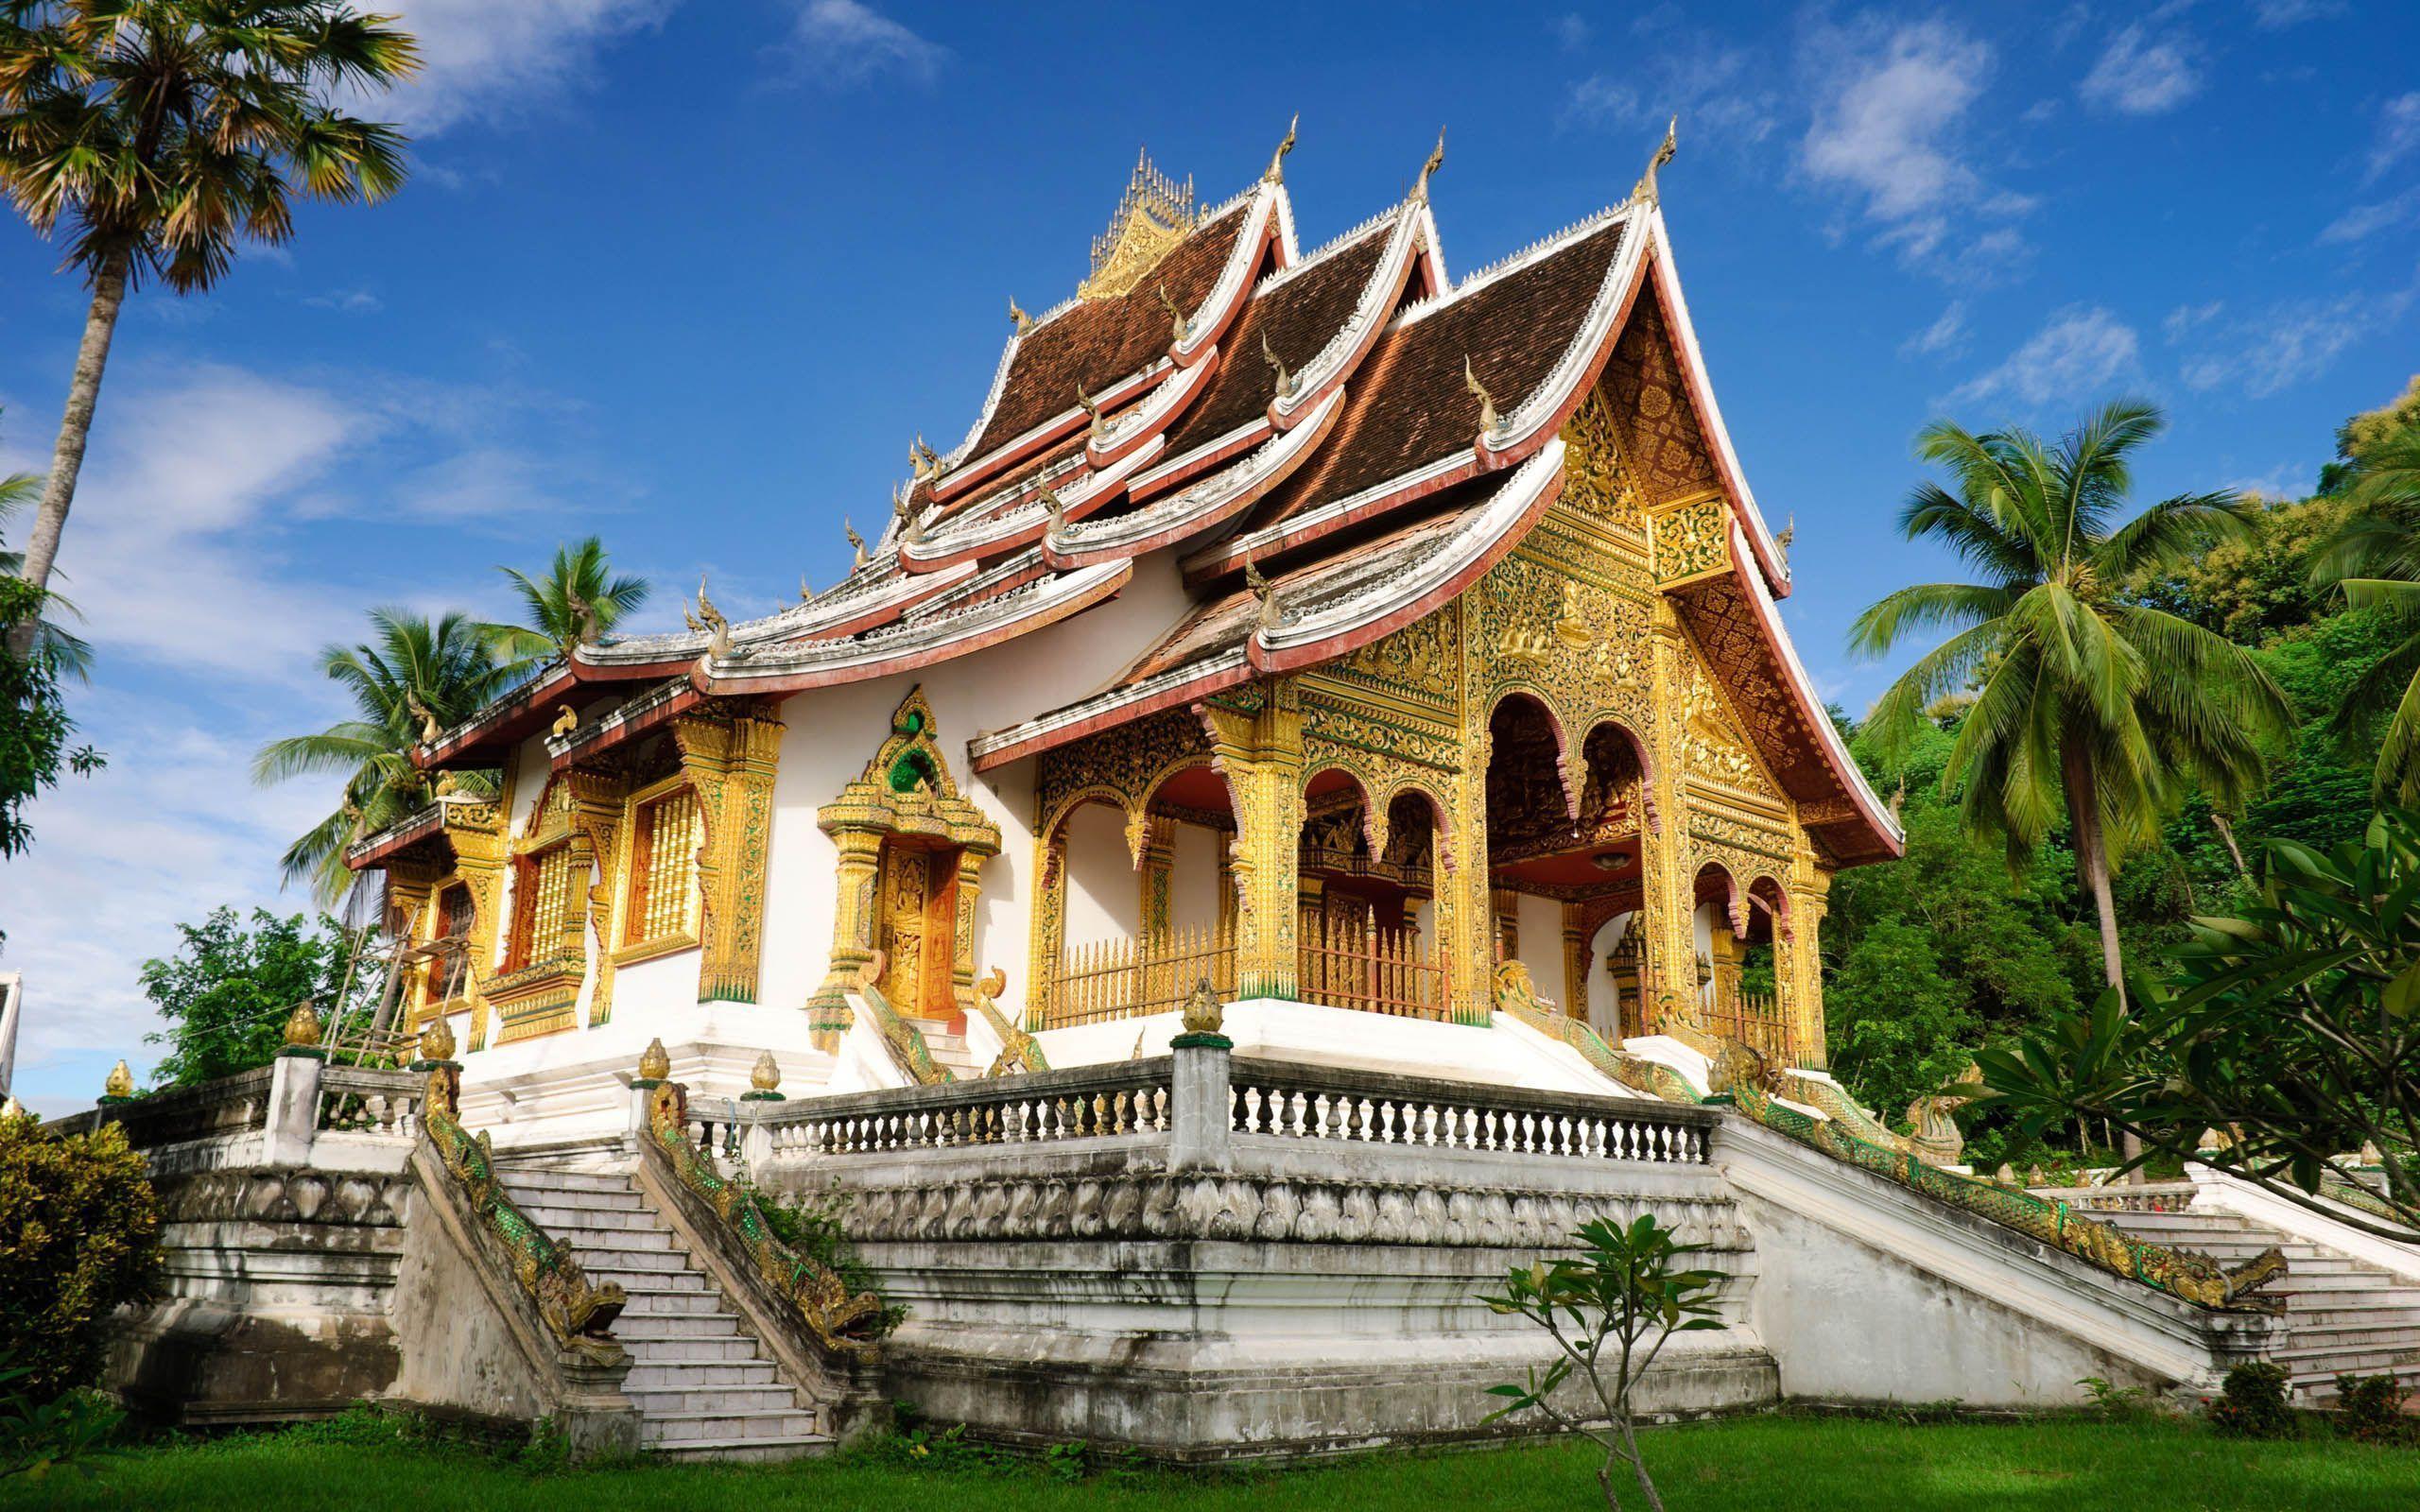 Laos remains relatively exotic, unexplored and is possibly